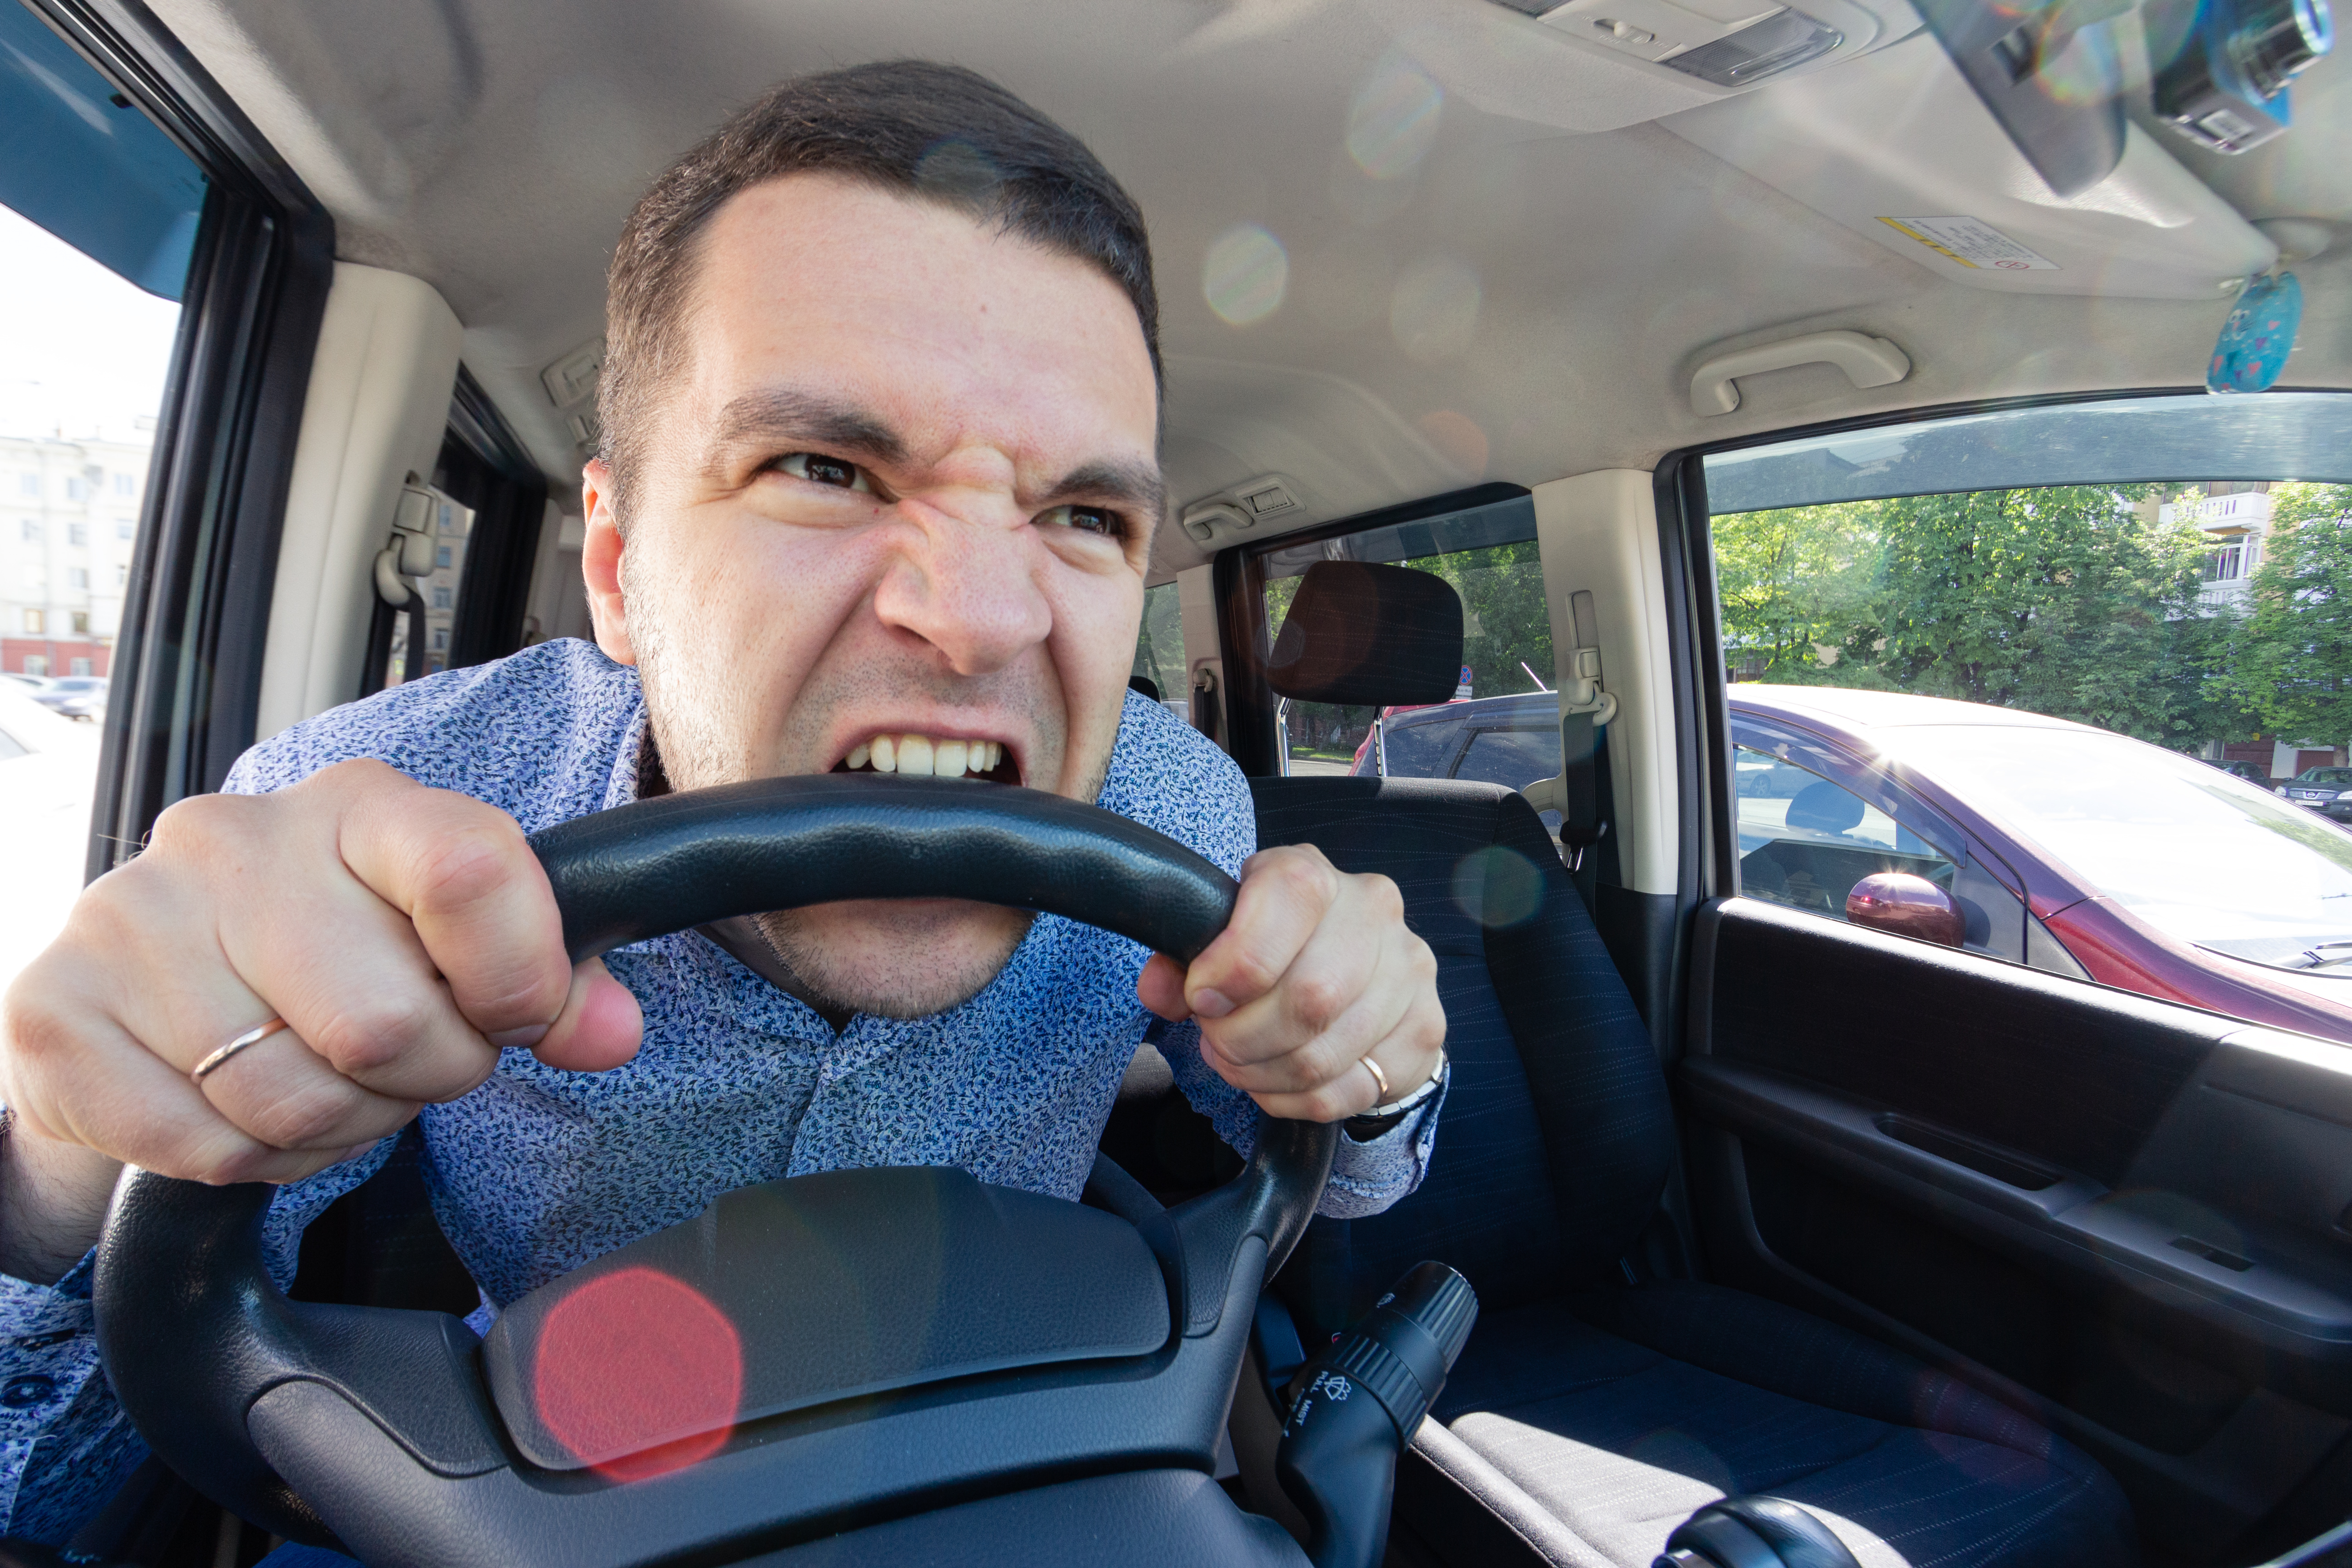 An angry young man bites the wheel of a car | Source: Shutterstock